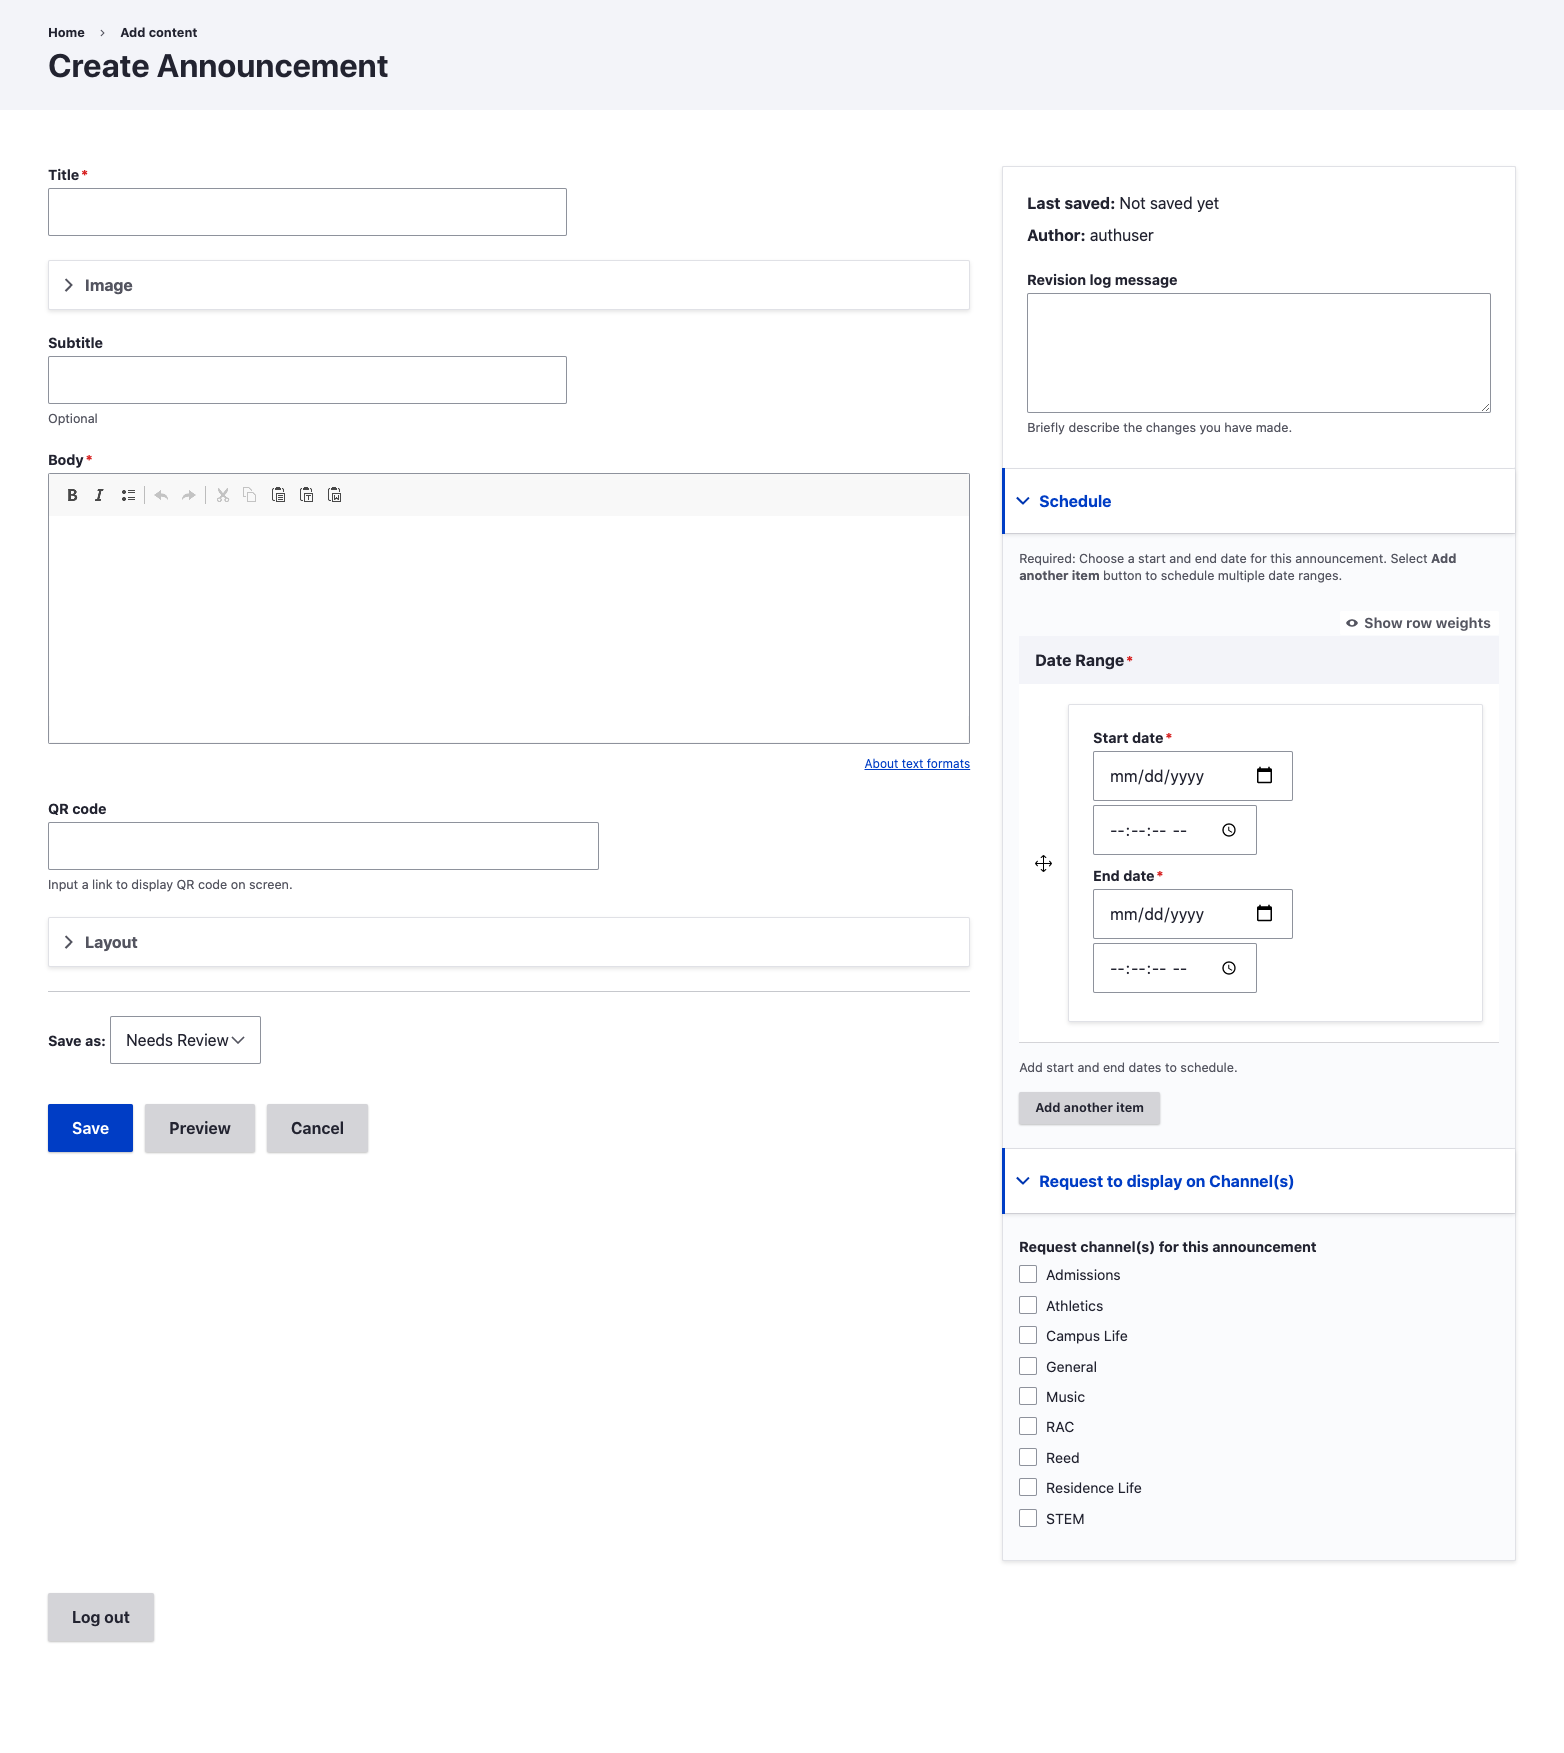 Example of BLUEview Announcement form